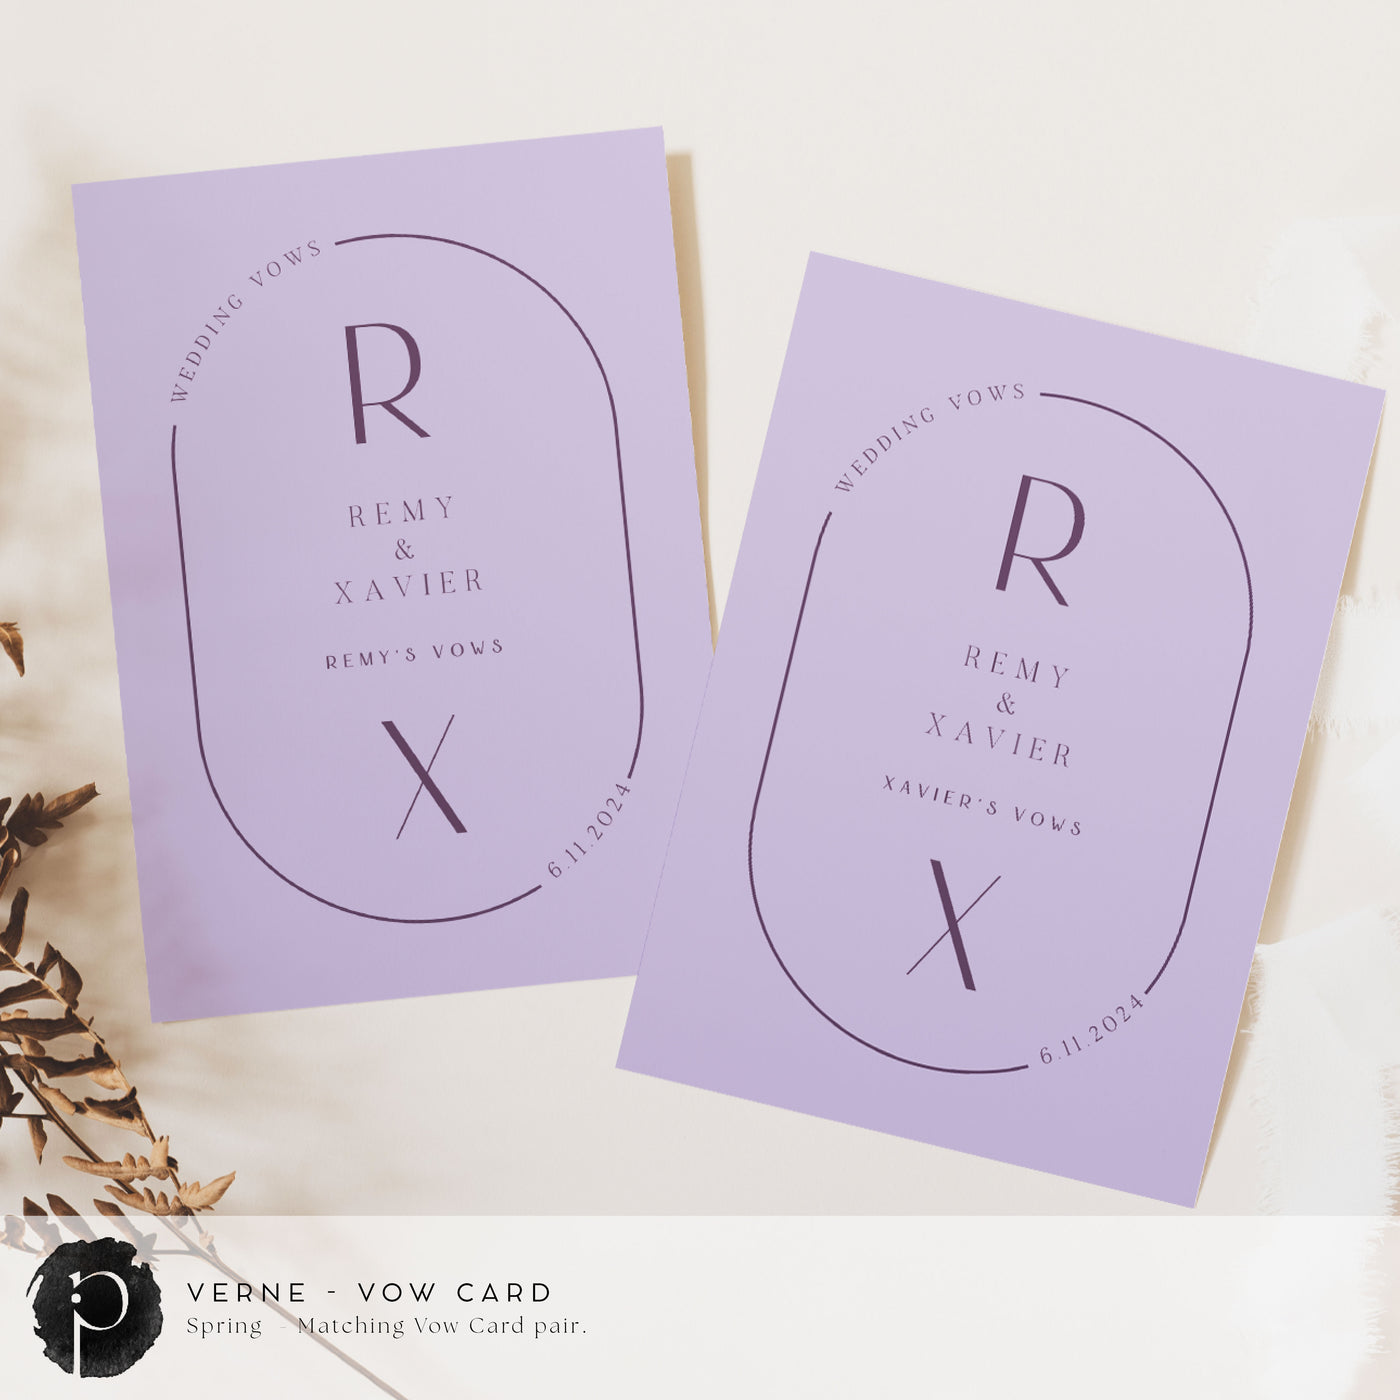 A pair of vow cards to write your wedding vows on in a modern midcentury wedding theme with dark purple writing on a light purple or lilac background